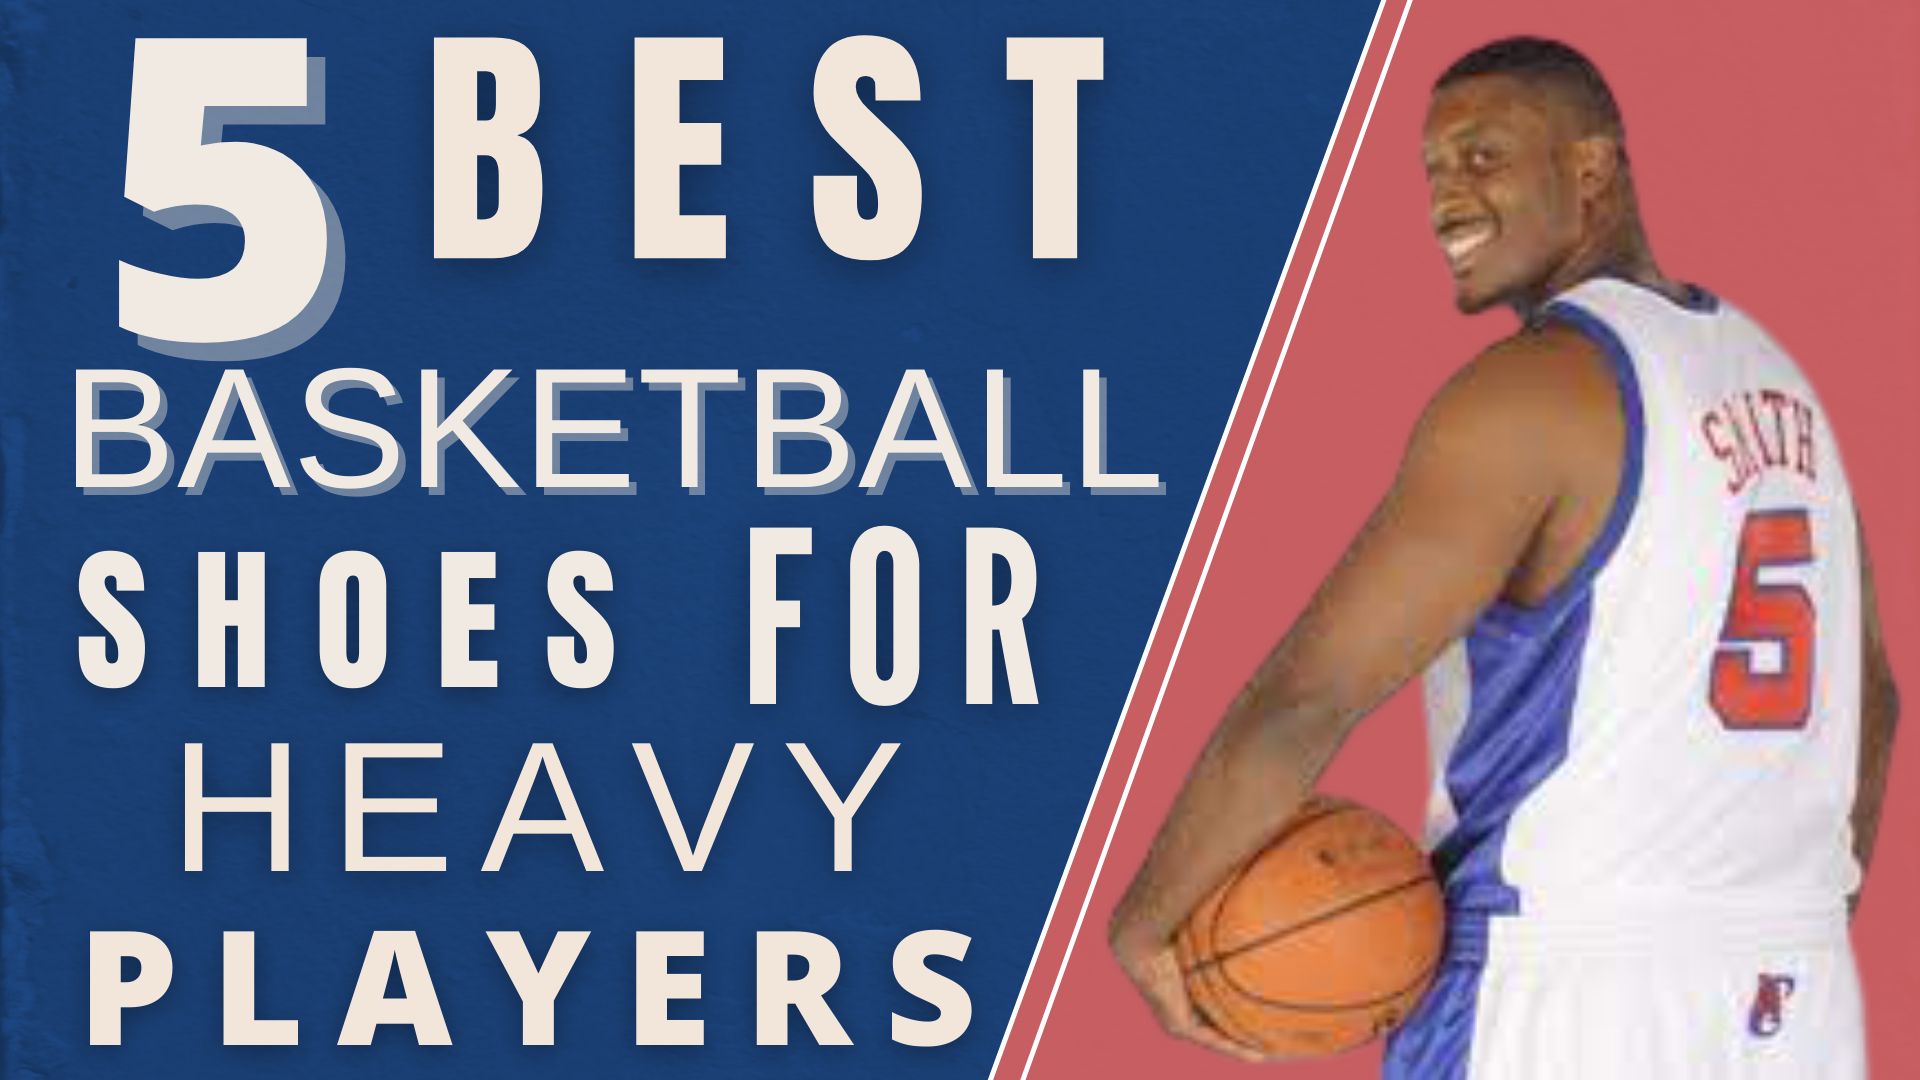 Top 5 Best Basketball Shoes for heavy players – Review